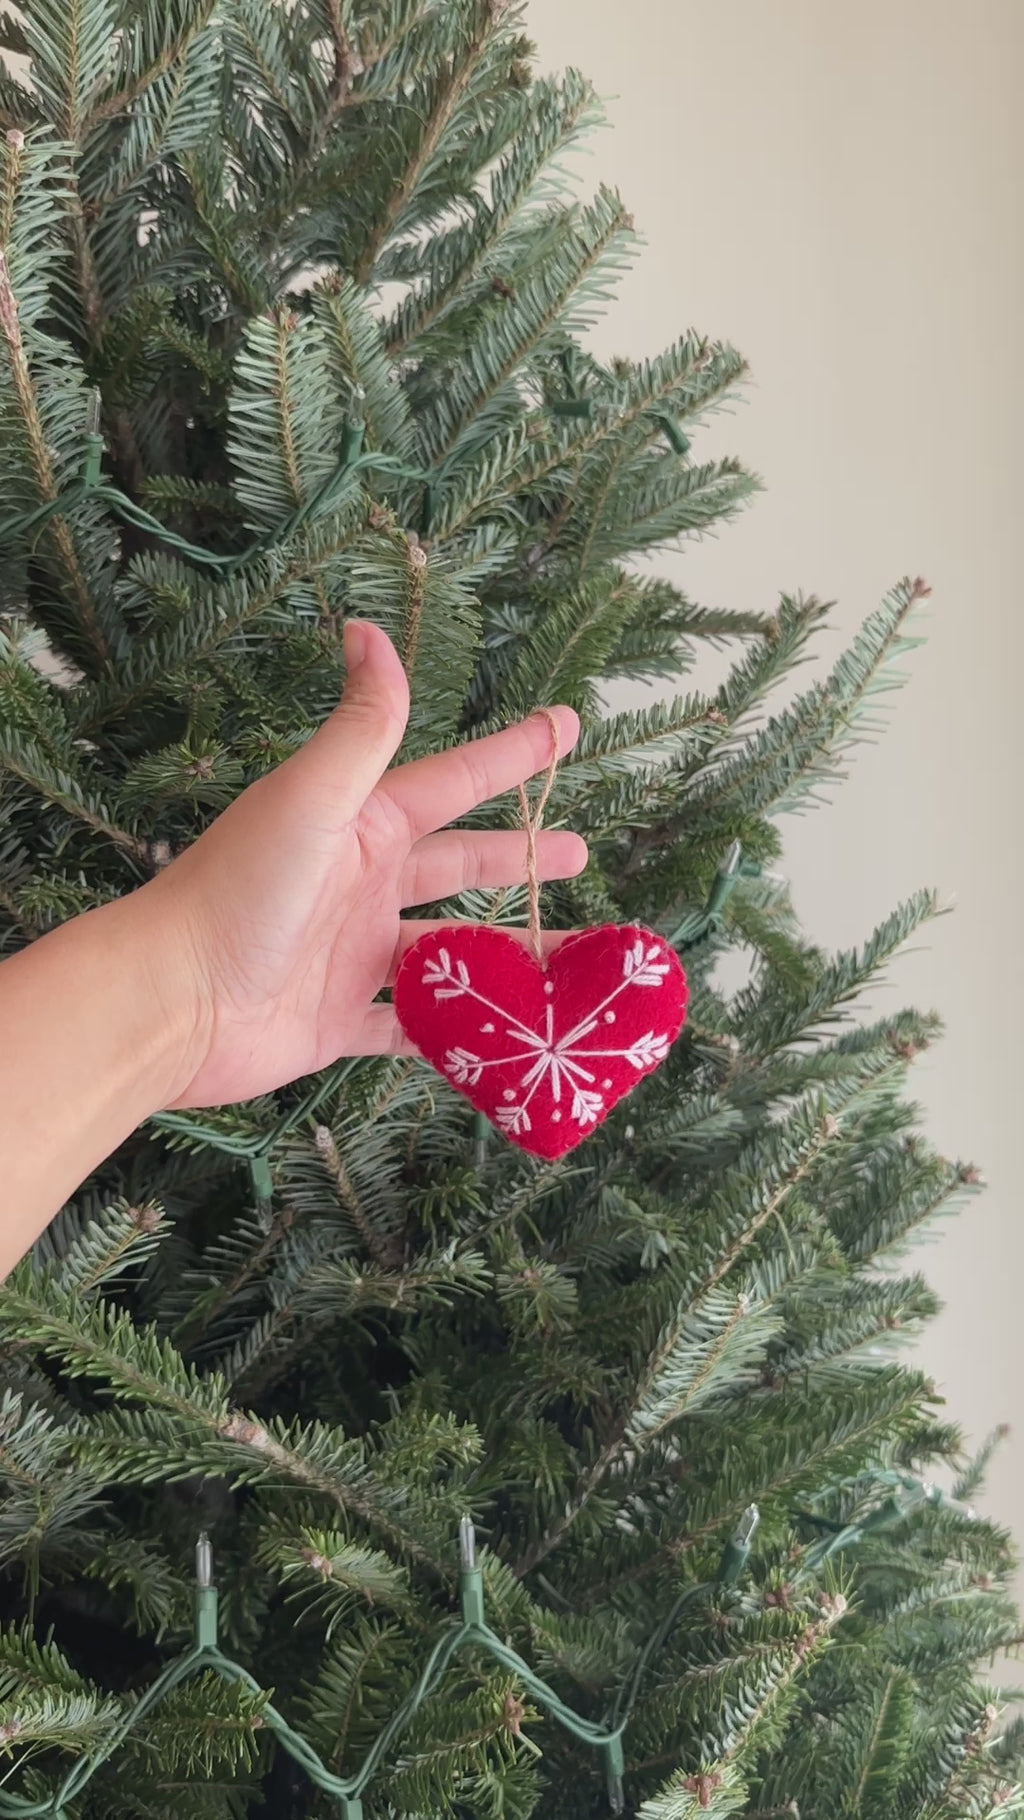 Felted Wool Snowflake Love Ornament: Unique Holiday Decor - Ganapati Crafts Co.